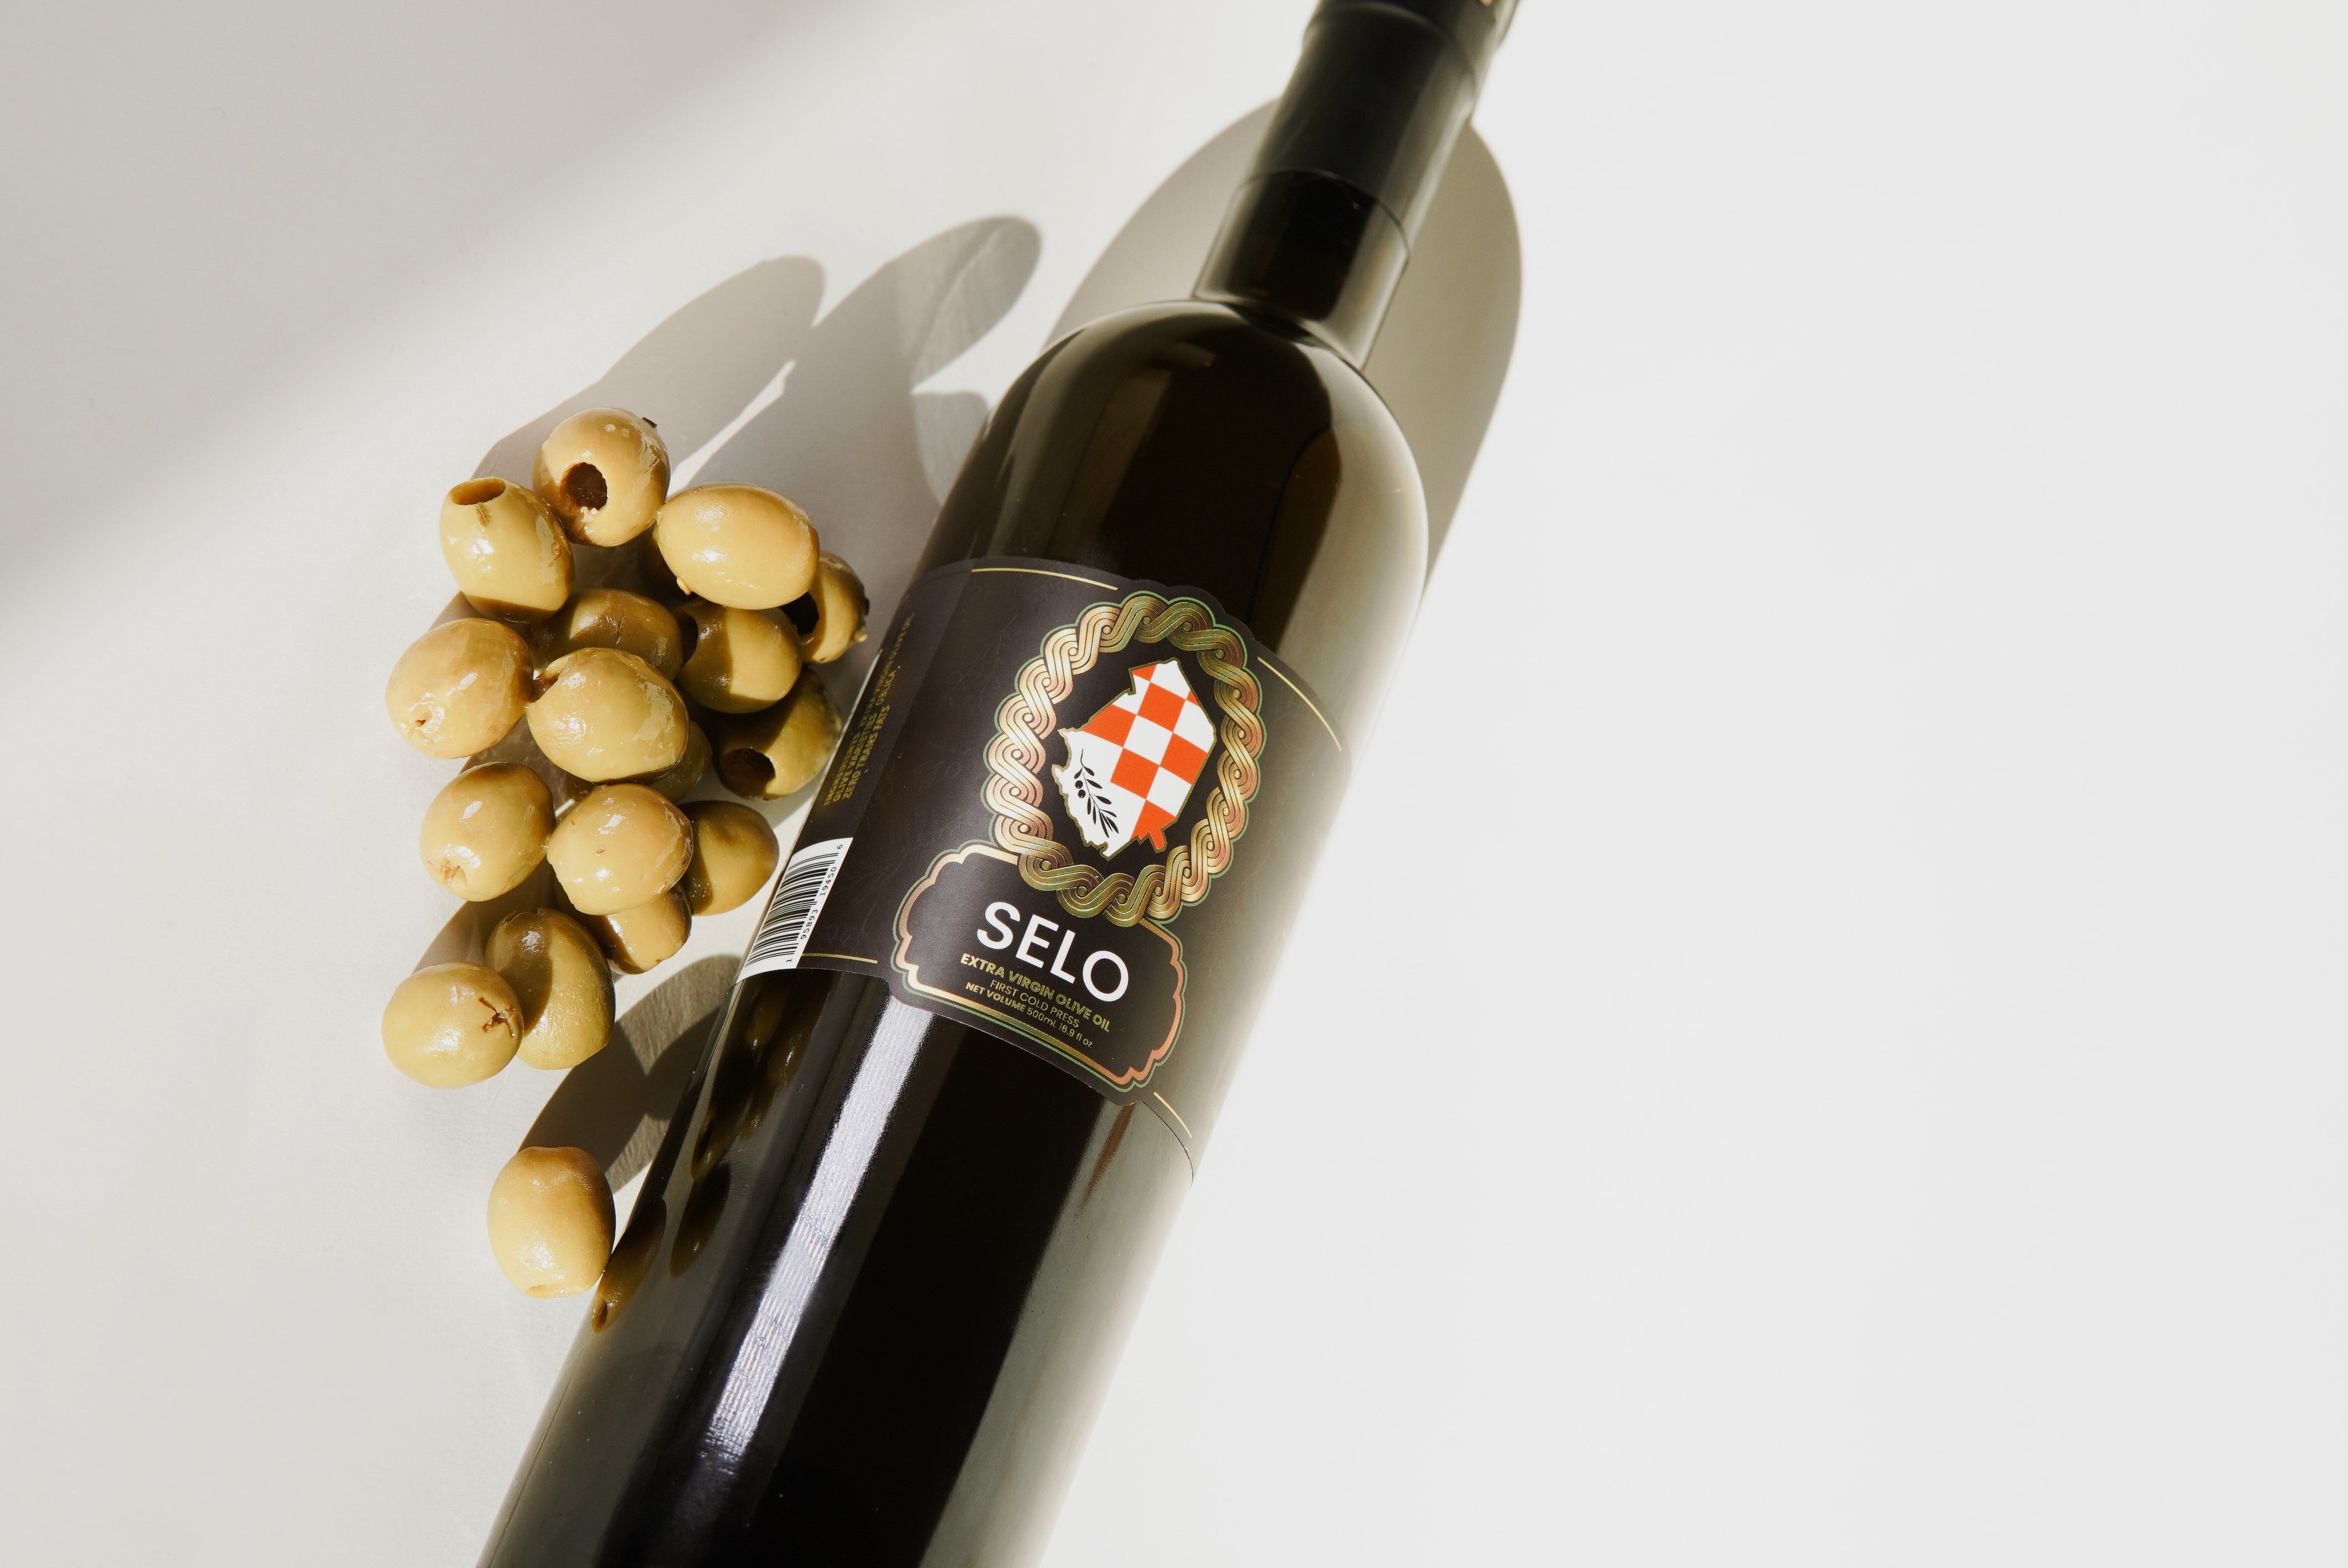 A bottle of Selo Croatian Olive Oil showcasing its rich golden hue, featuring the brand name and logo prominently on the label, with a lush green olive branch and olives in the background, representing the high-quality and authentic Croatian olive oil.